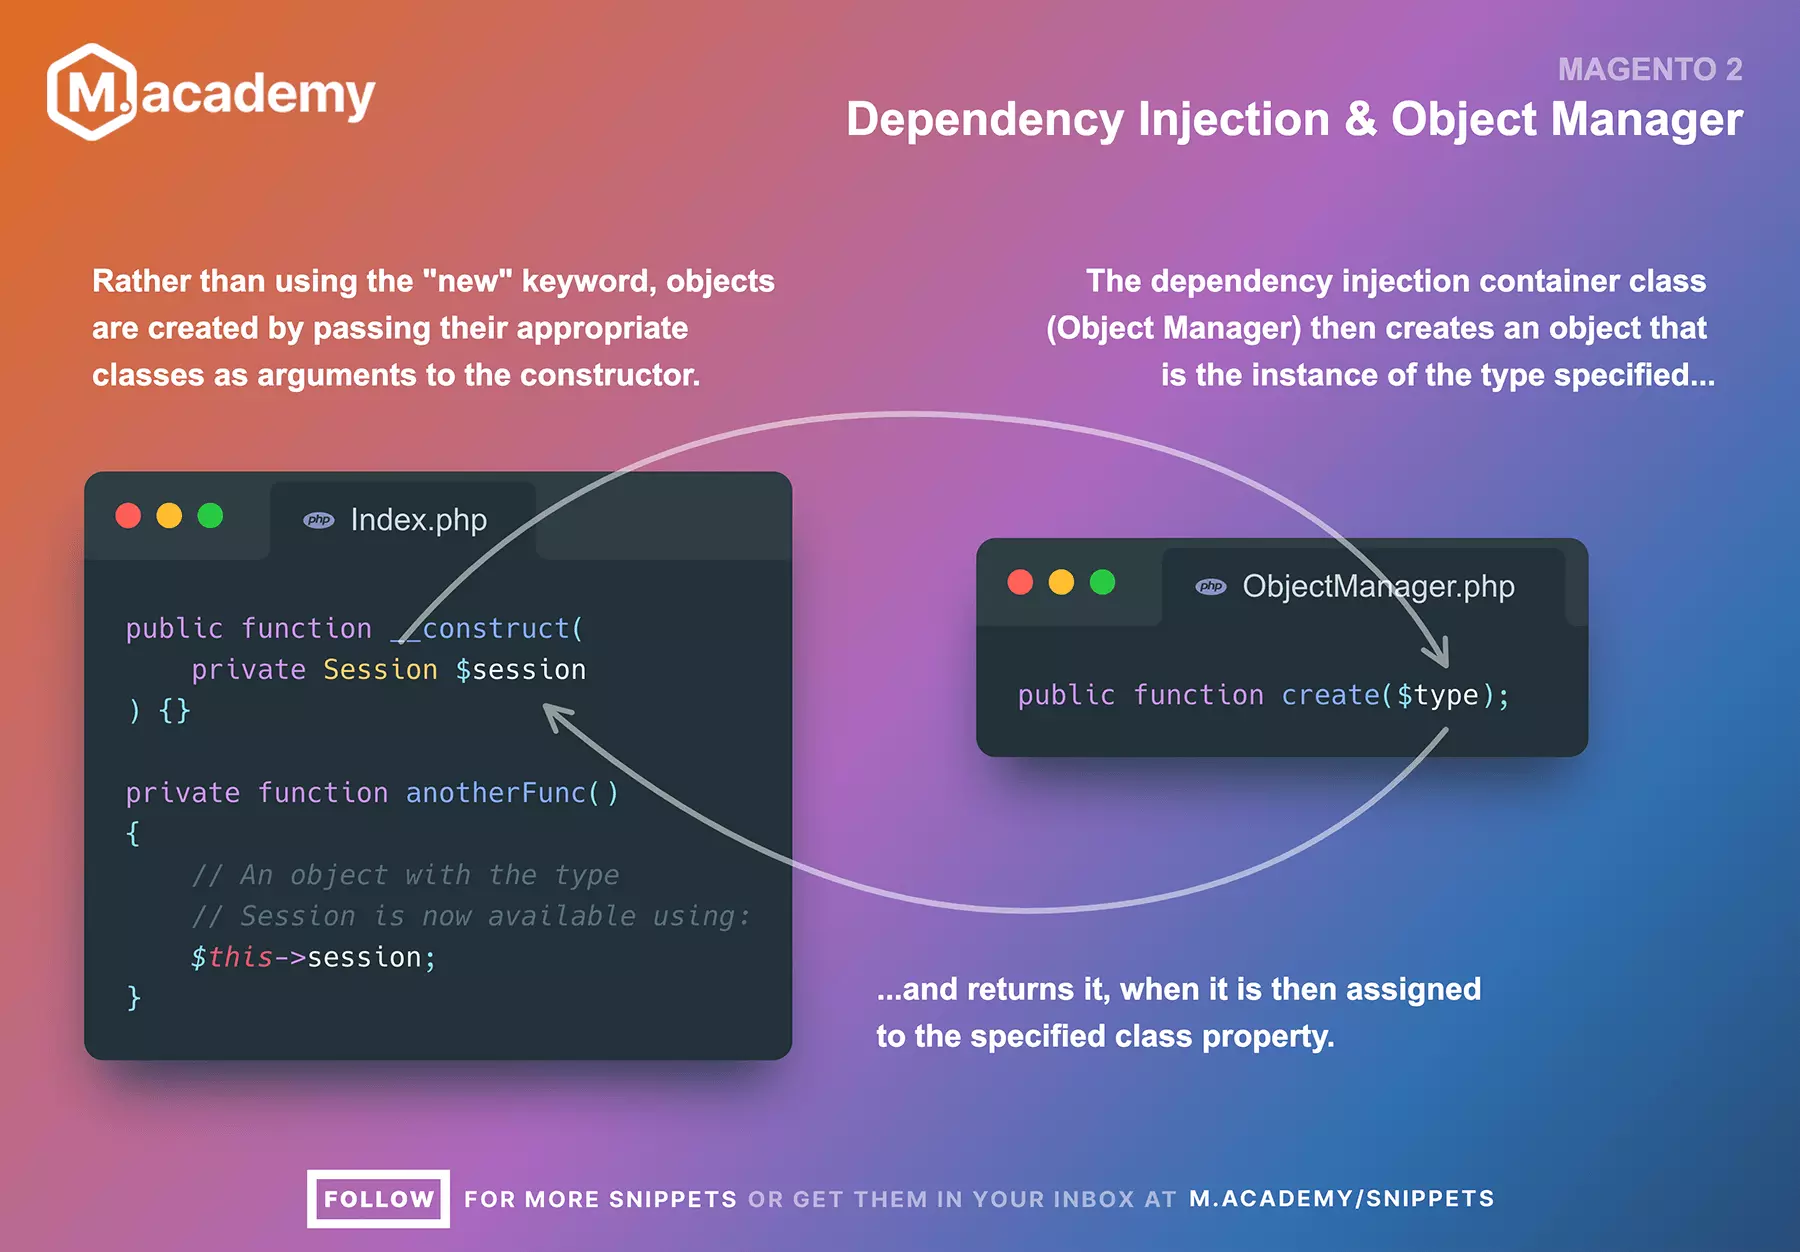 Magento 2 Snippet for Dependency Injection and Magento Object Manager